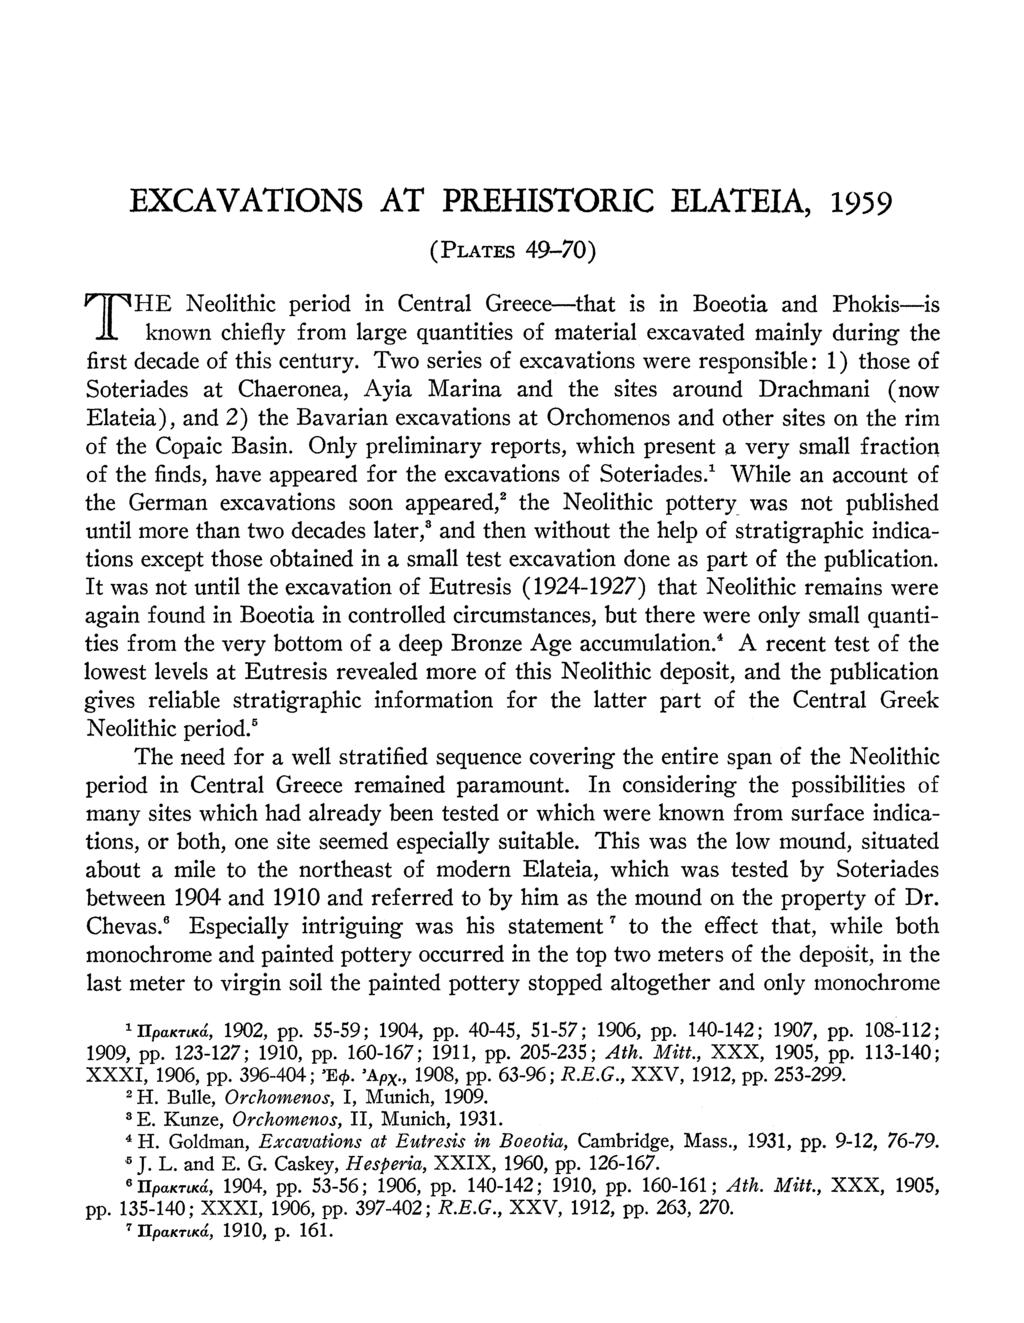 EXCAVATIONS AT PREHISTORIC ELATEIA, 1959 (PLATES 49-70) T HE Neolithic period in Central Greece-that is in Boeotia and Phokis-is known chiefly from large quantities of material excavated mainly